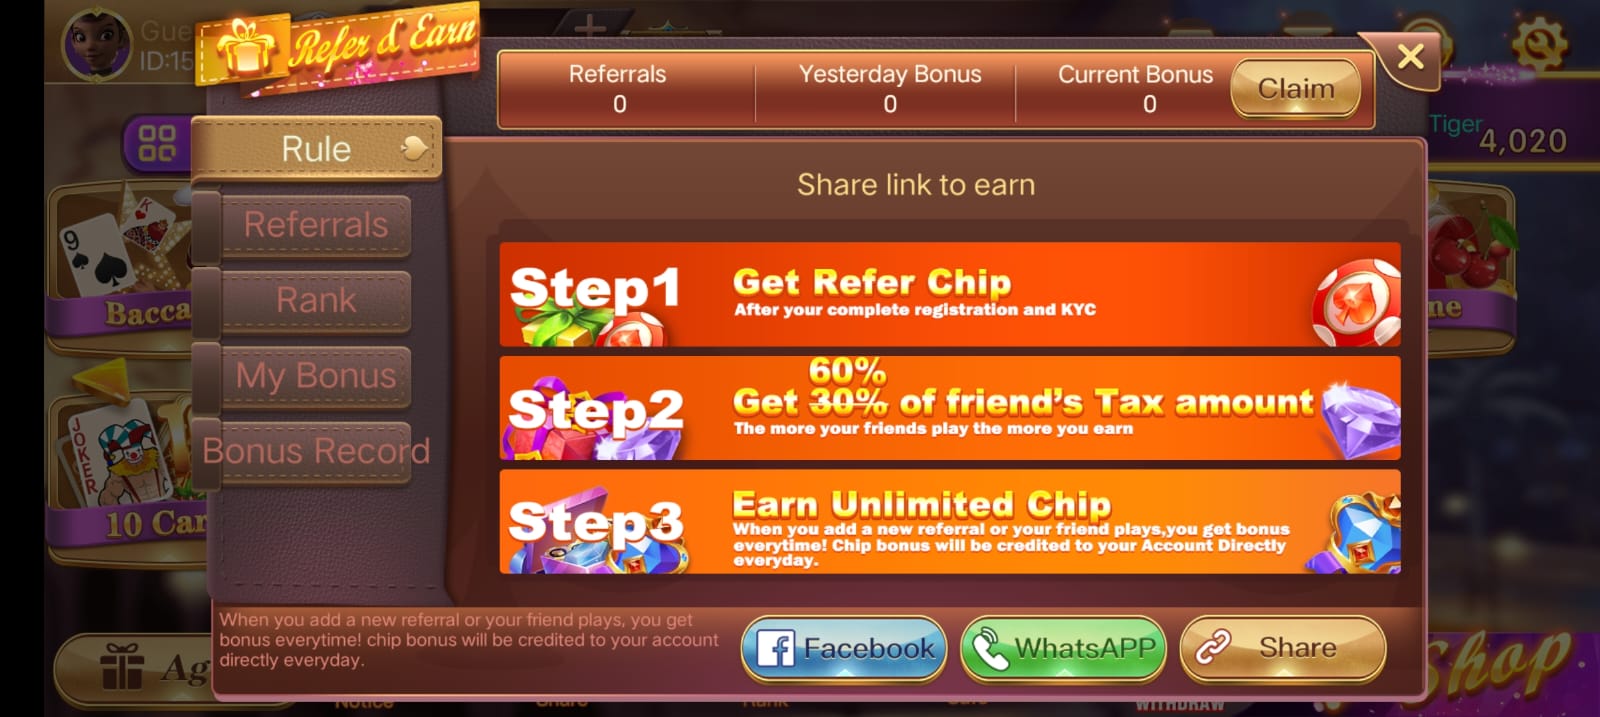 REFER AND EARN IN RUMMY ROYALLY APP